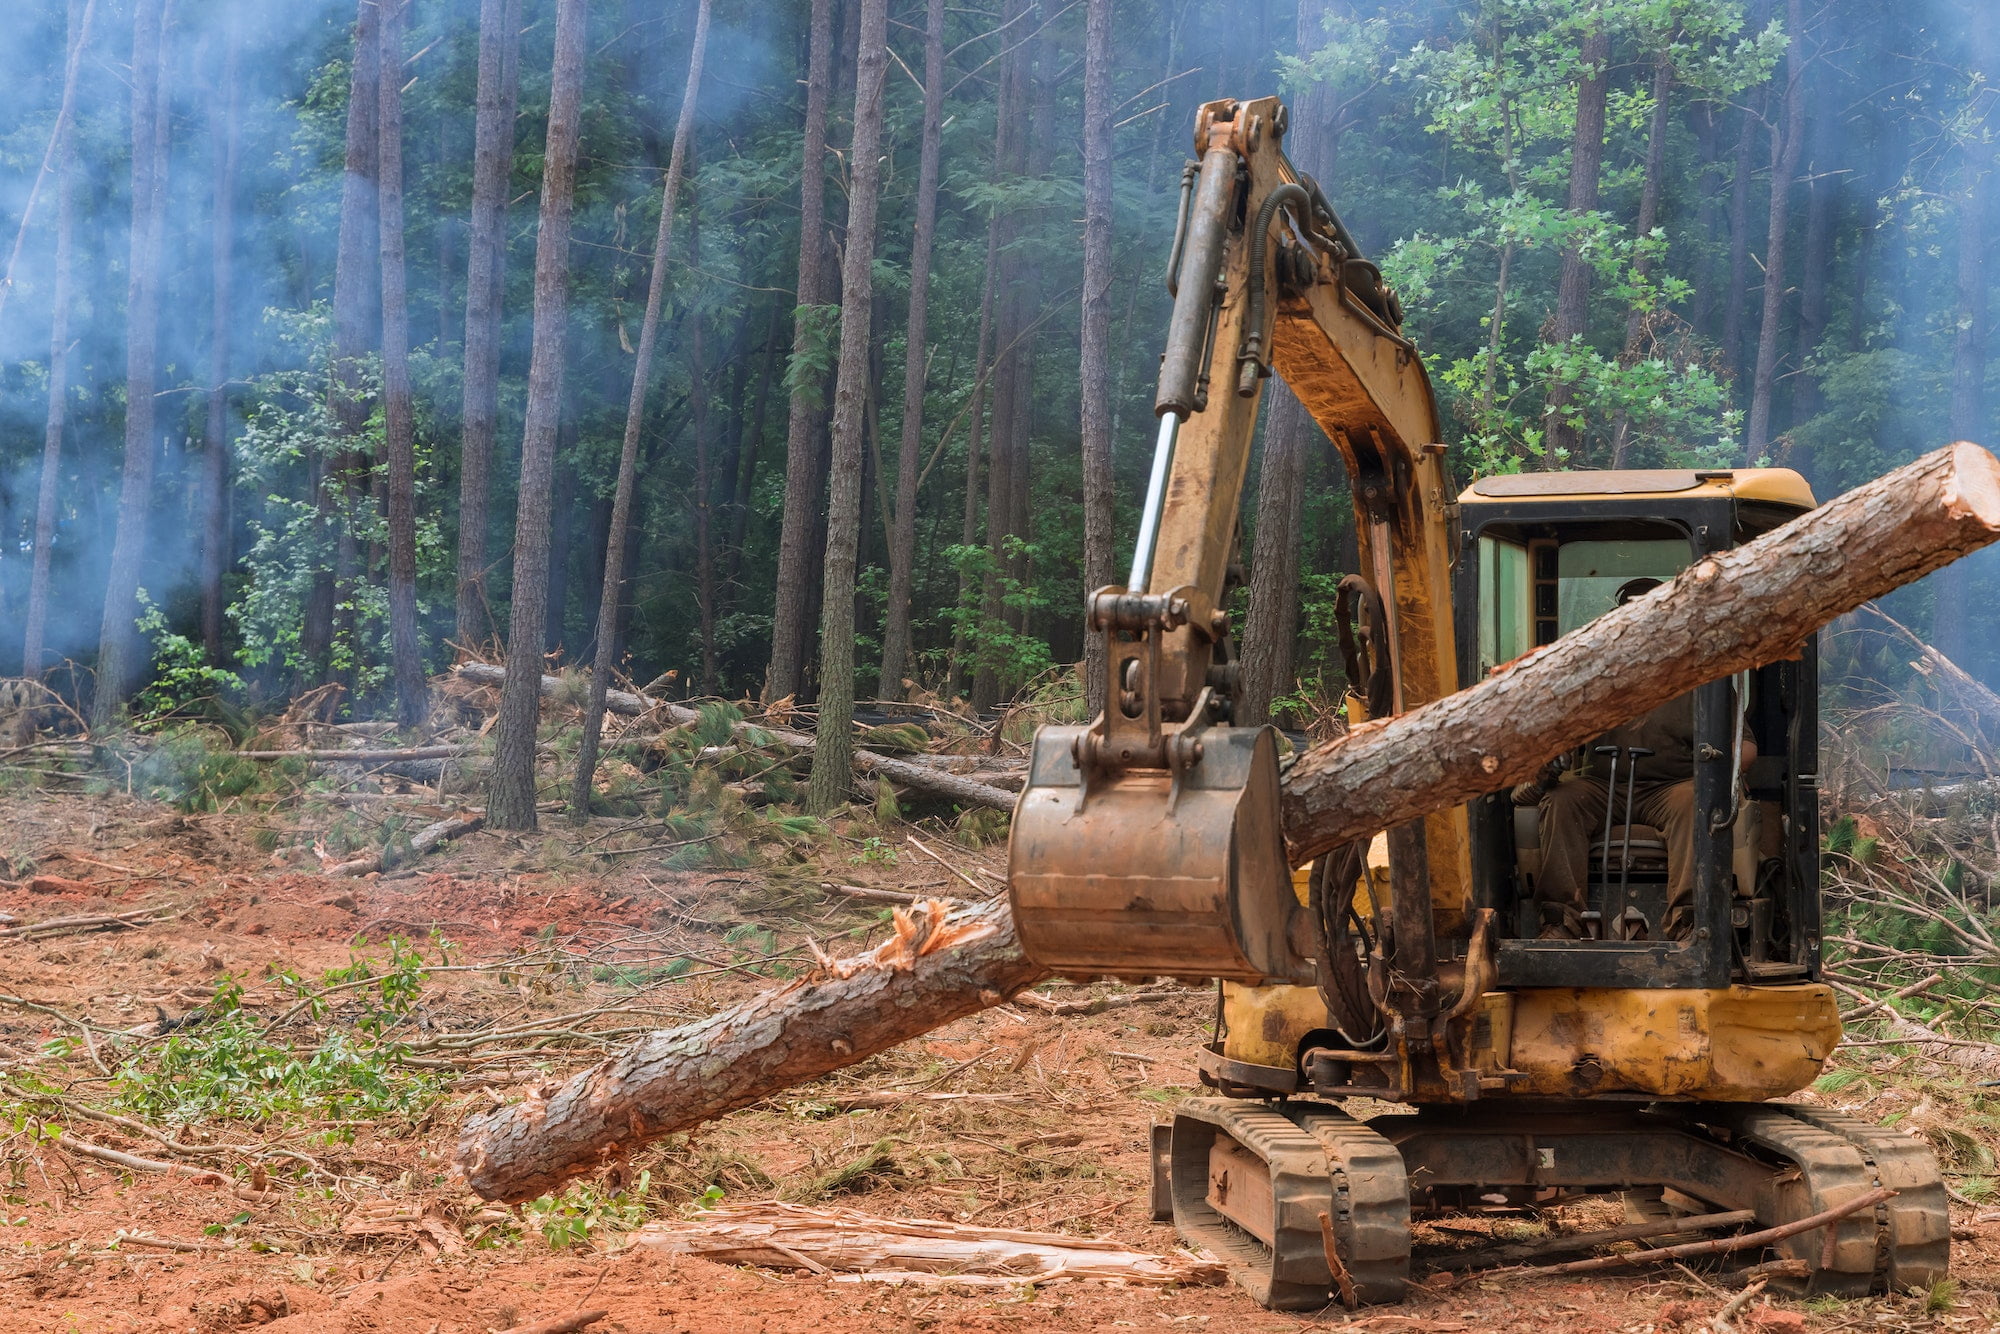 As part of the deforestation process, a tractor manipulator lifts logs from trees and uproots them